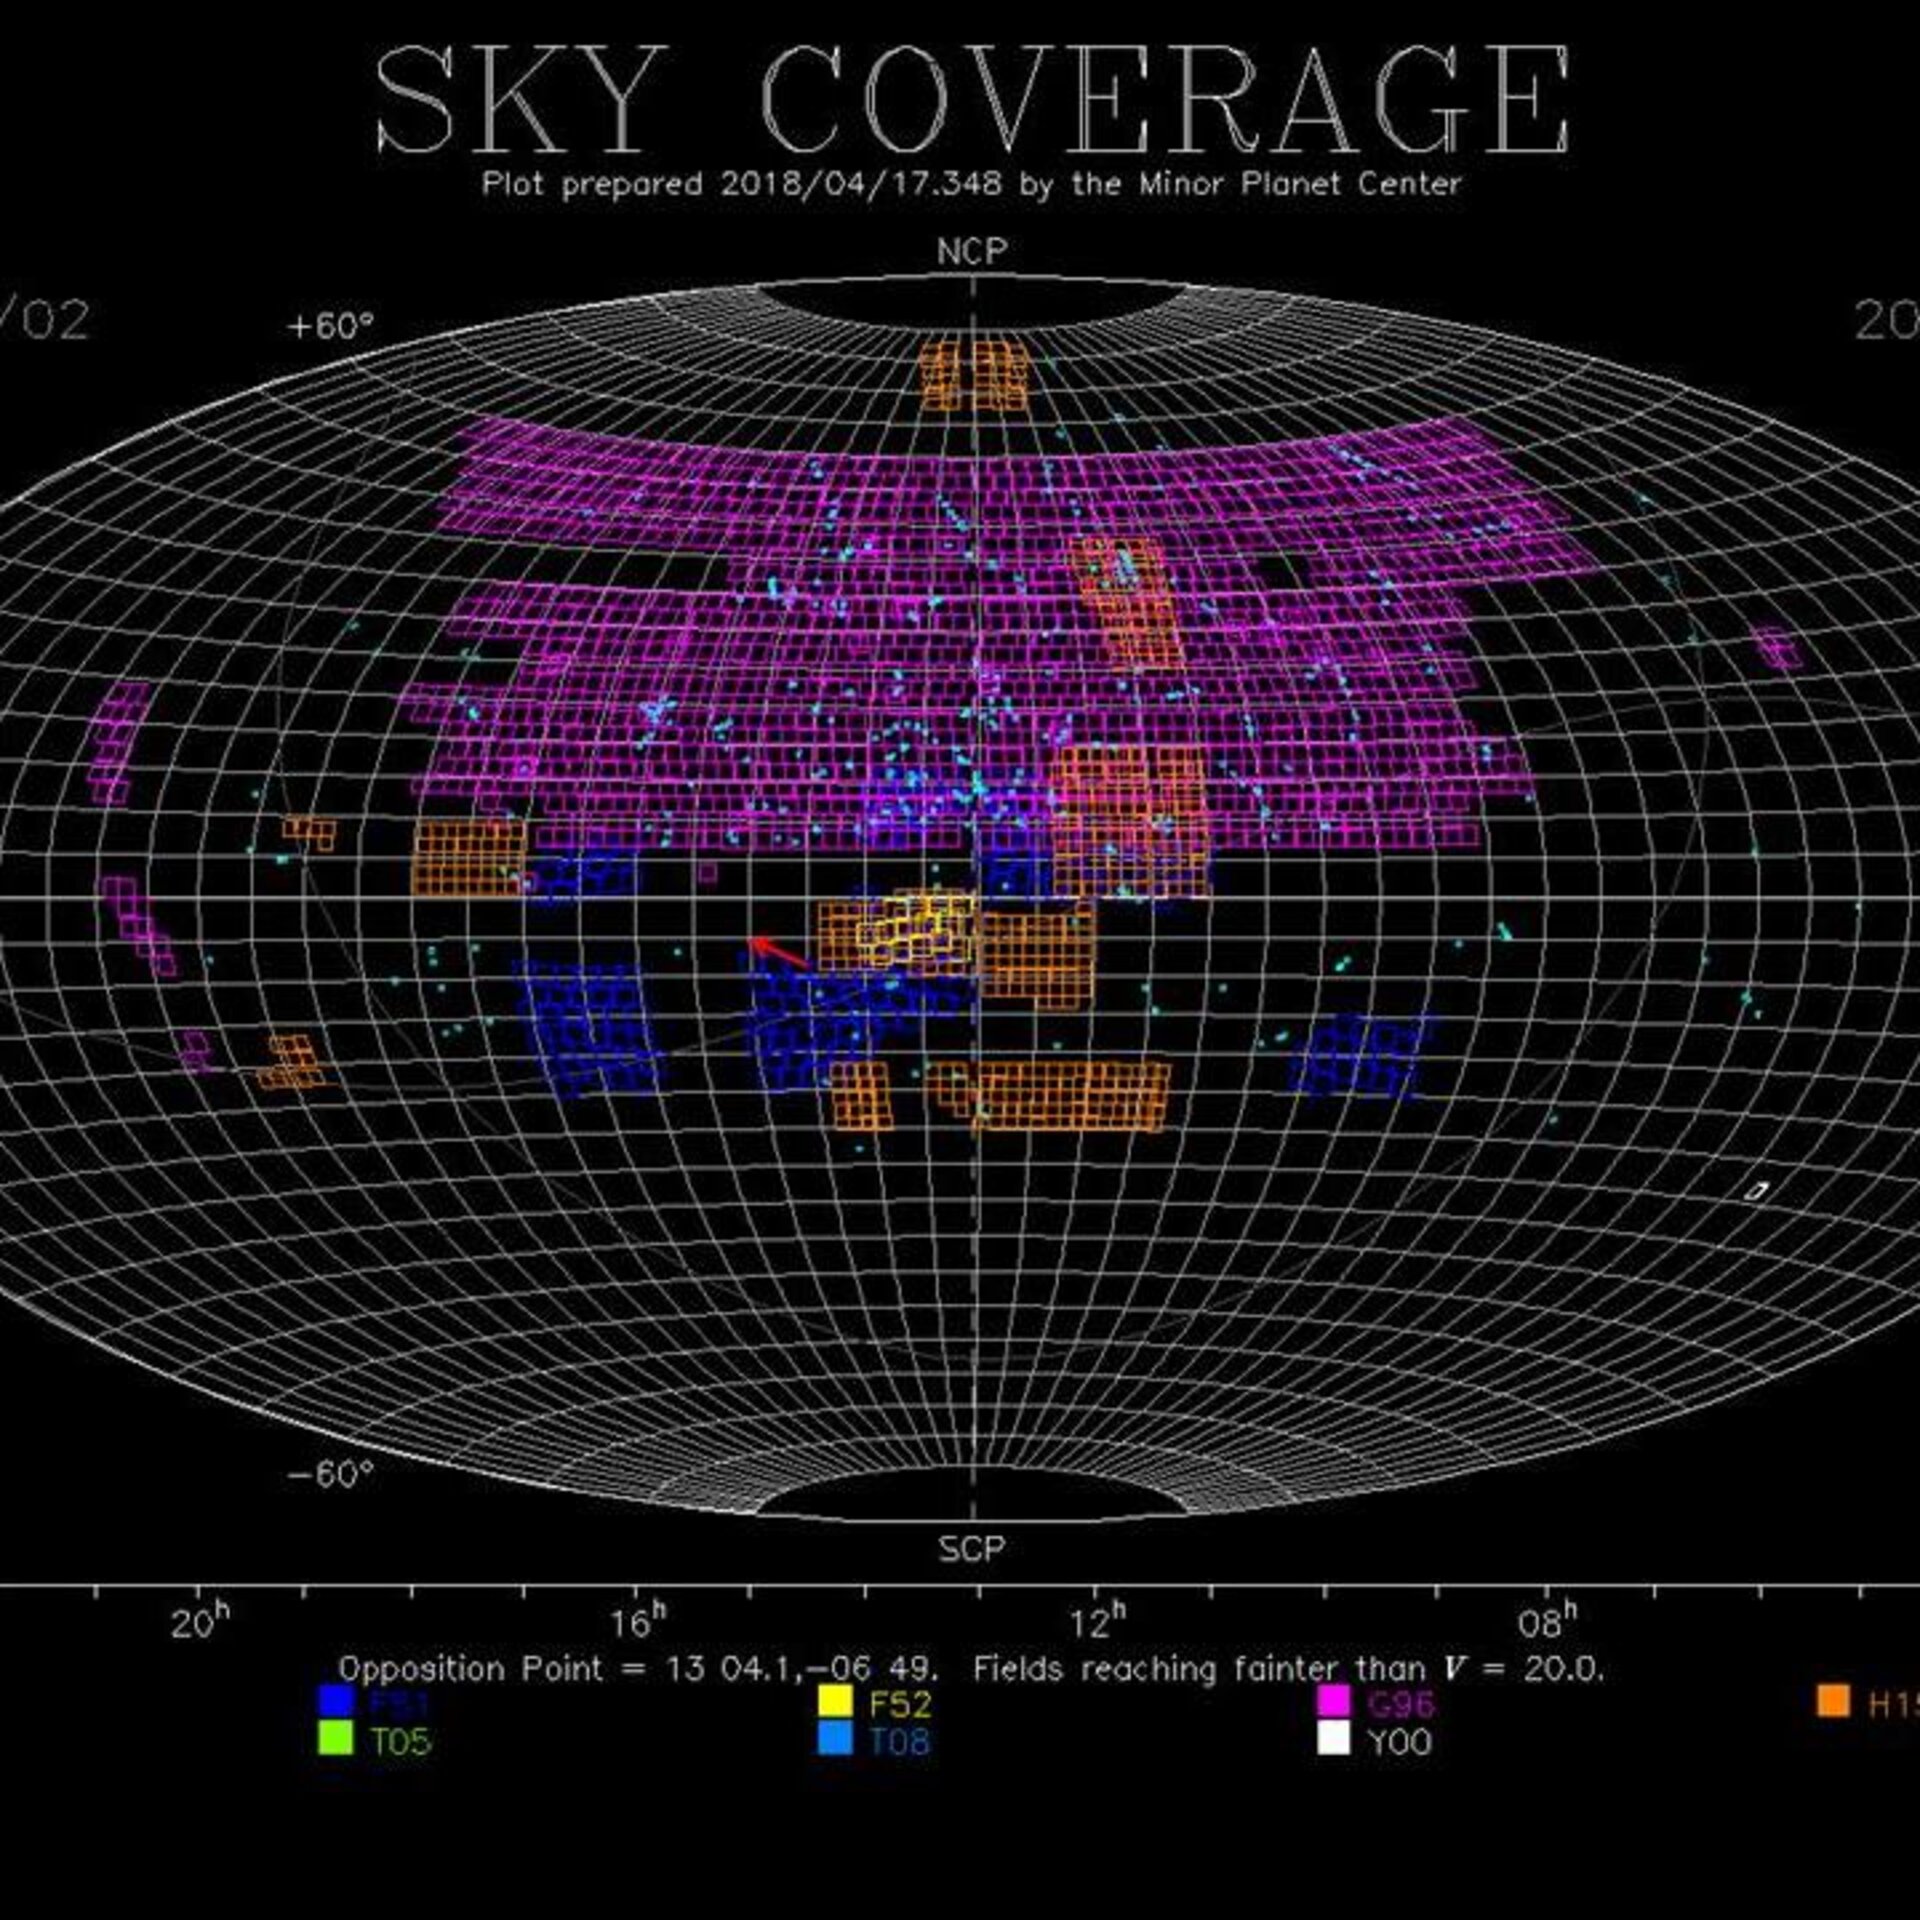 Sky Coverage plot prepared with the Minor Planet Center's tool